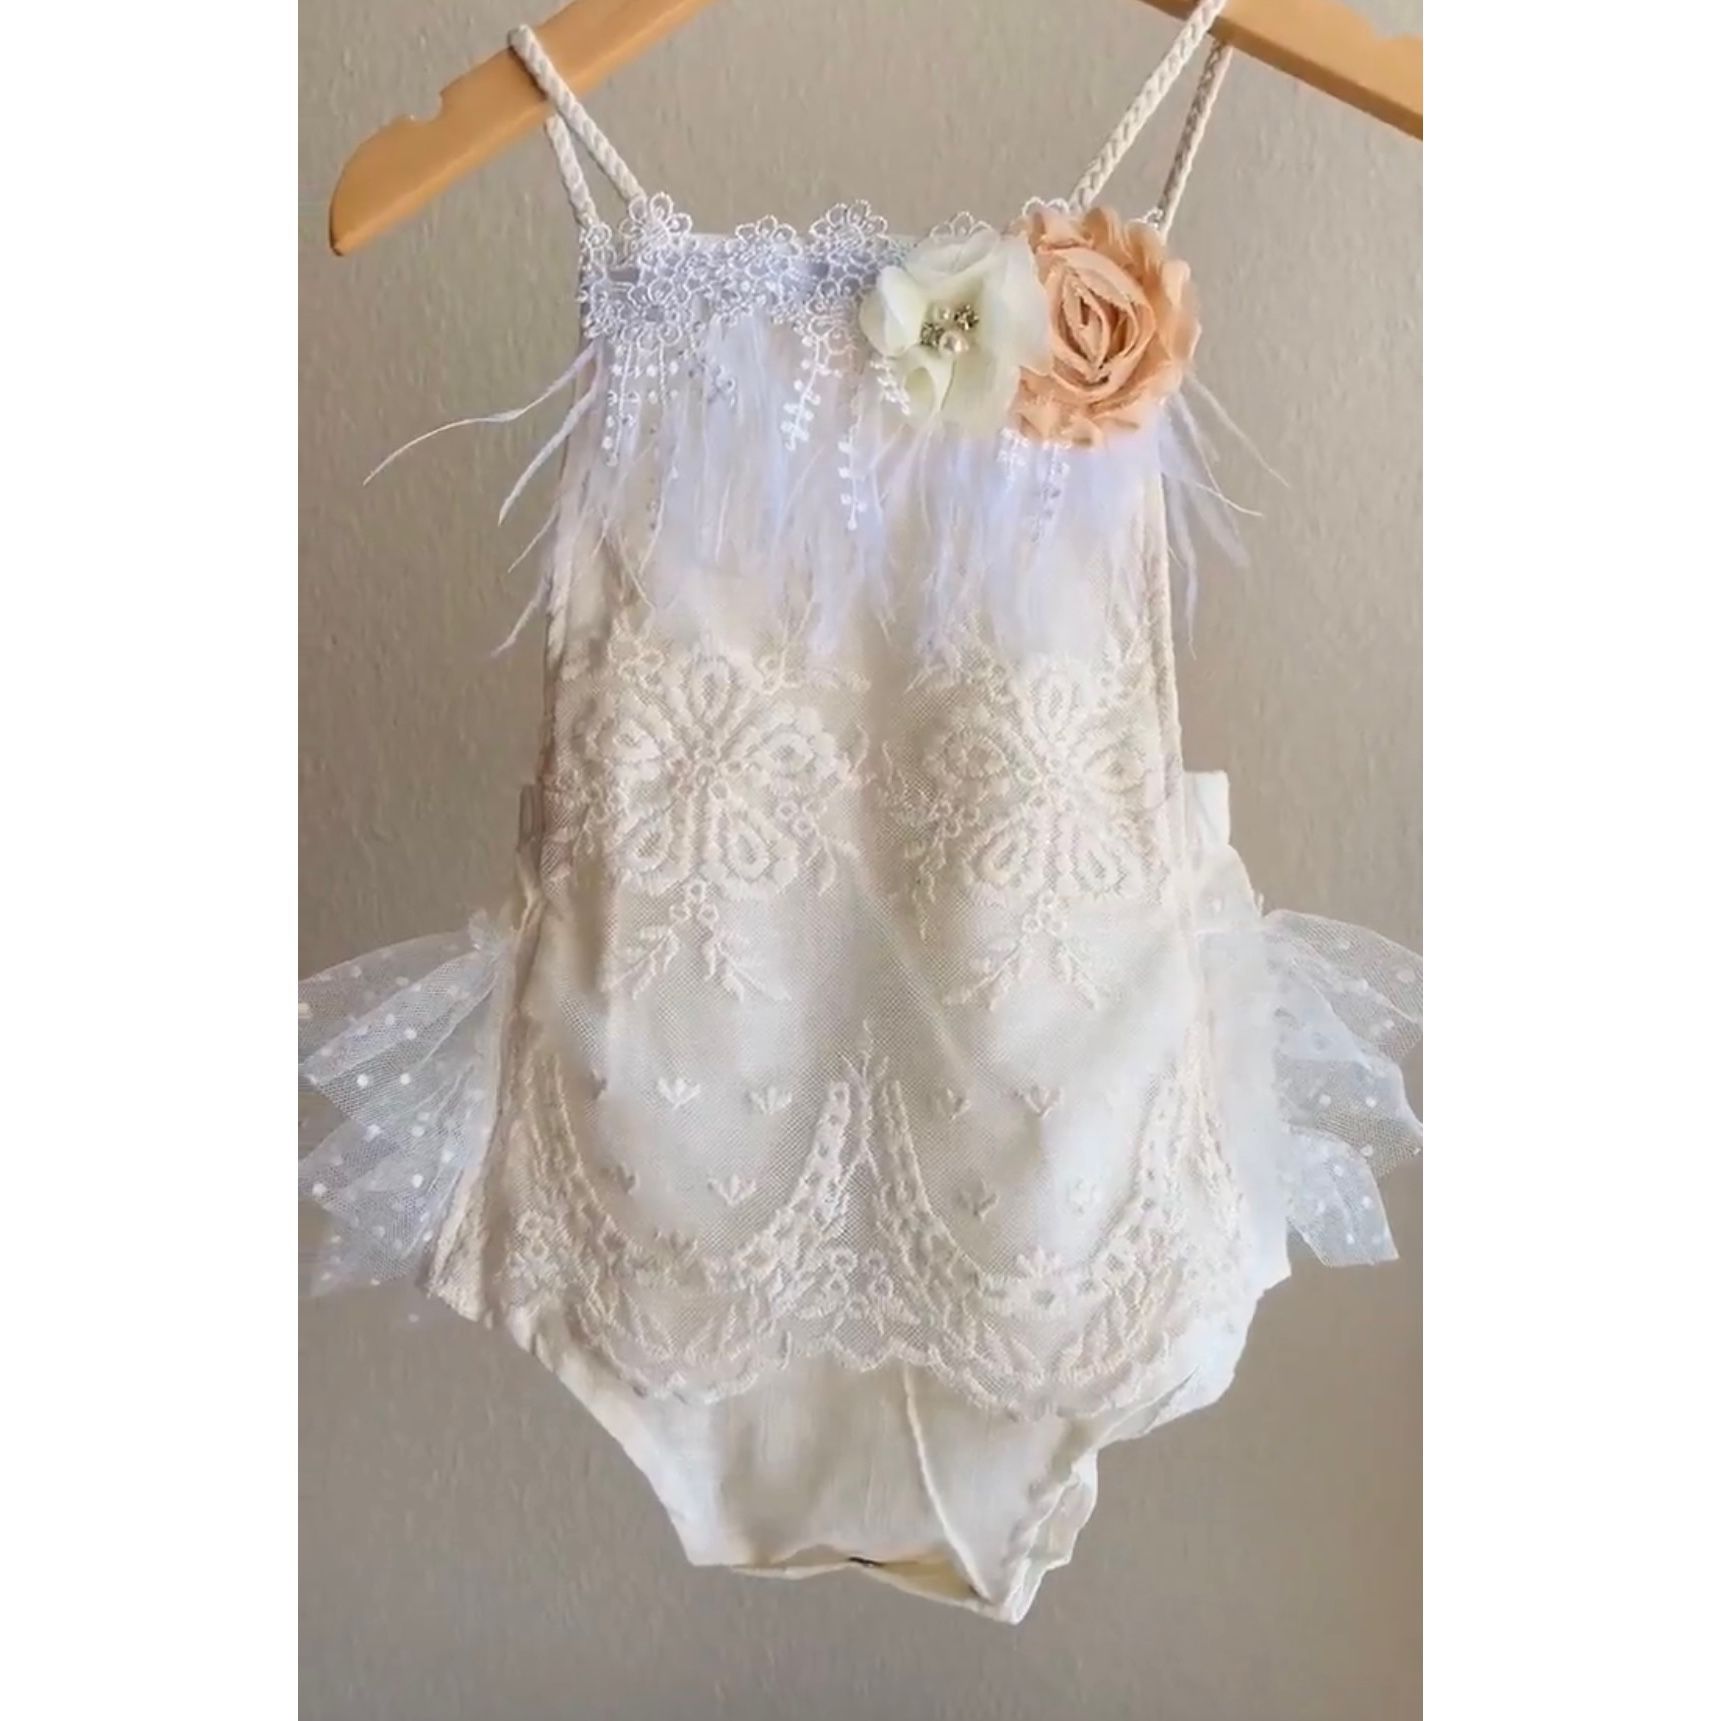 Boho Lace Baby Girl Romper, Outfit Girl, 6-12 months 